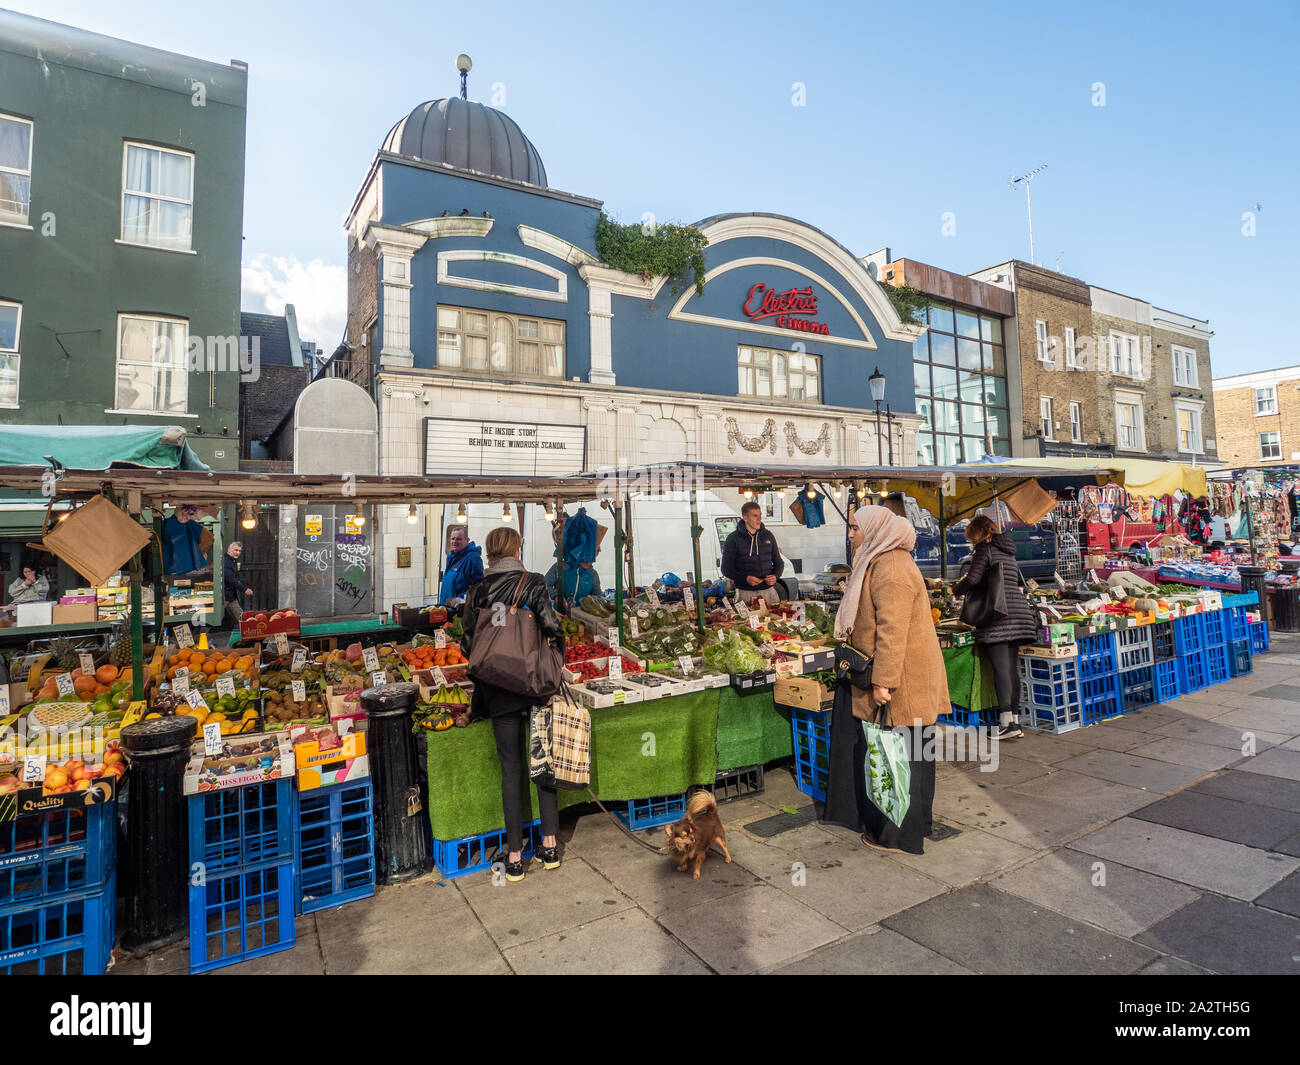 Fruit and Veg for sale at a market on Portabello road, Notting Hill, London.Behind is the blue facade of Electric Cinema. Stock Photo